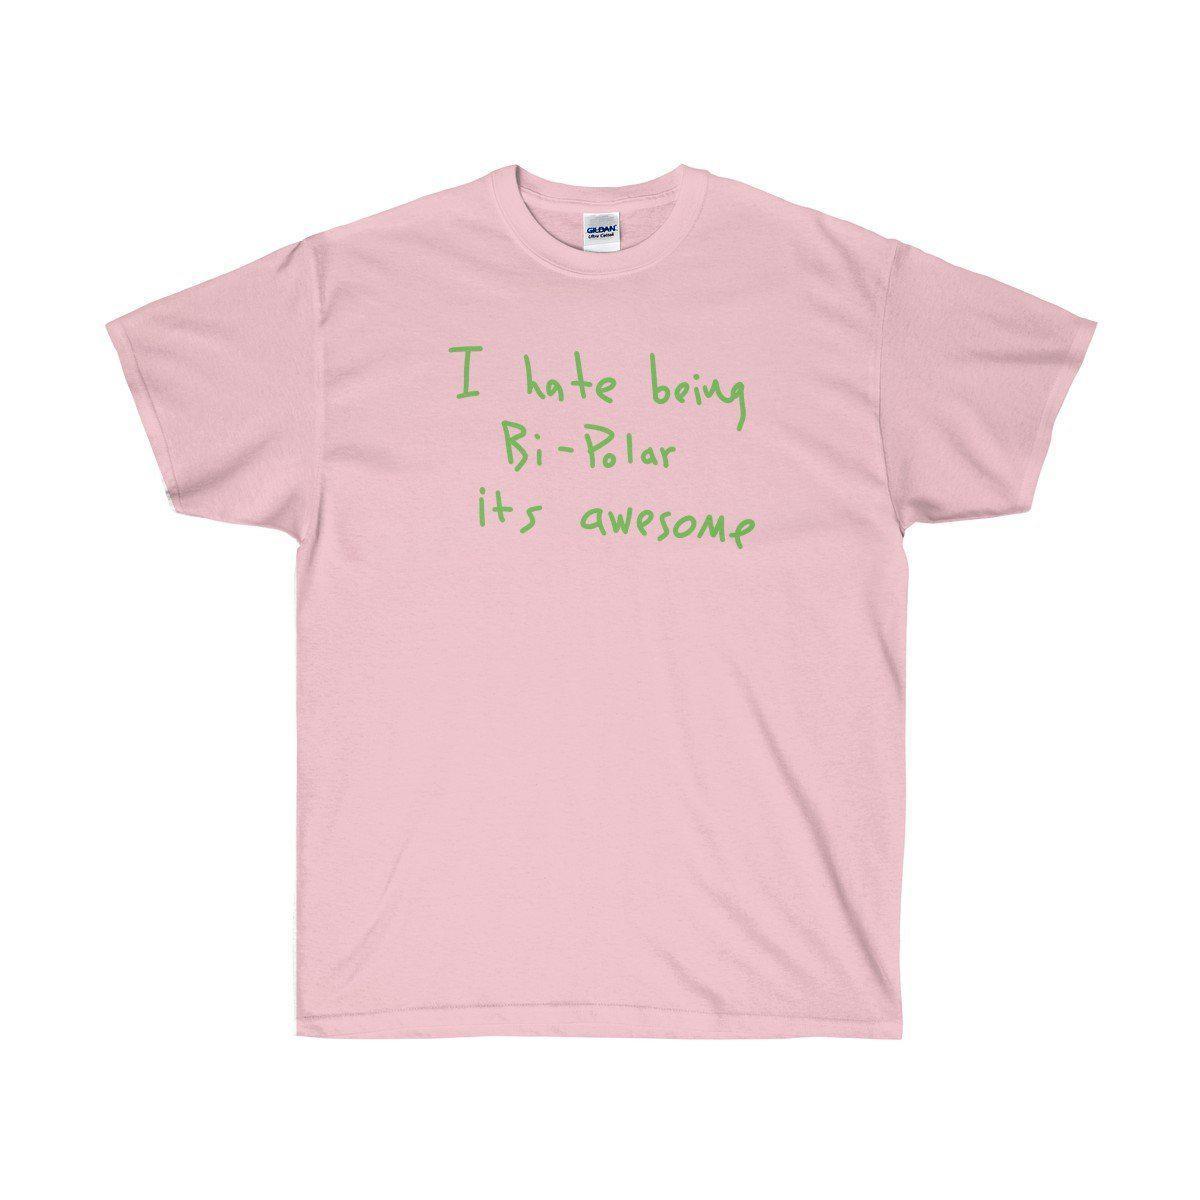 I hate being Bi-Polar it's awesome Kanye West inspired Tee-Light Pink-S-Archethype